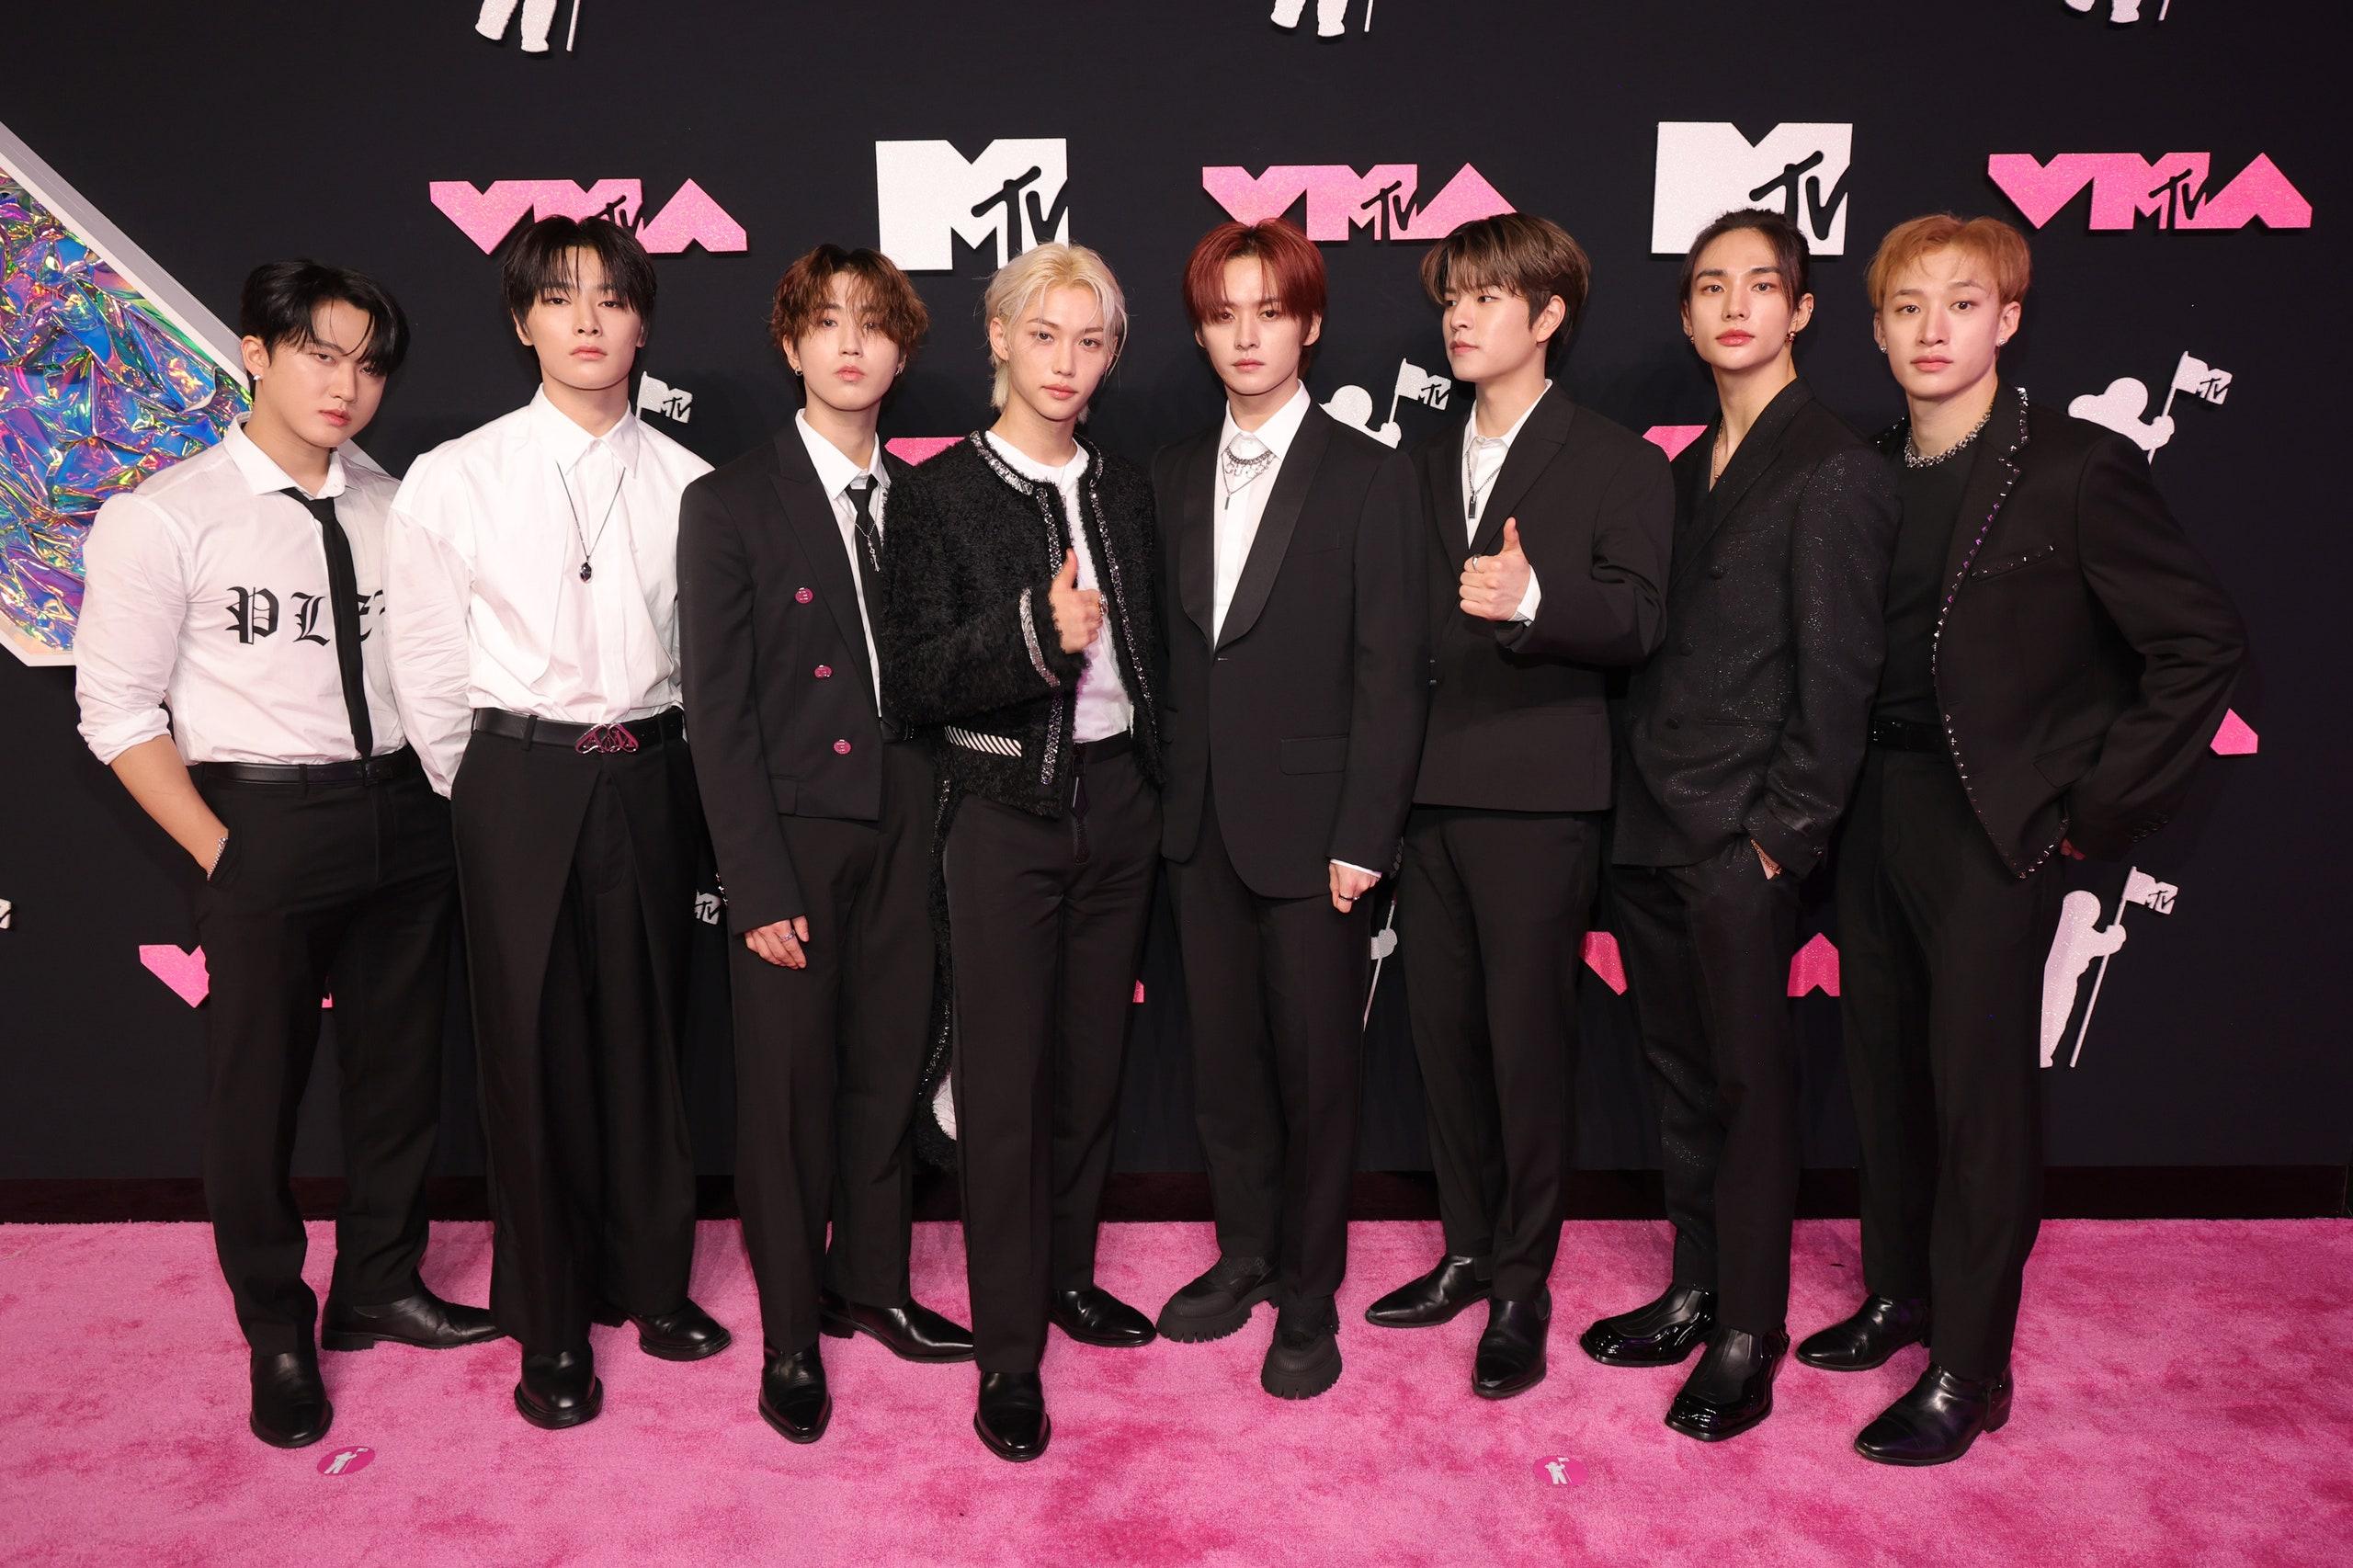 Watch Stray Kids Make Their Vmas Debut With Fiery S Class